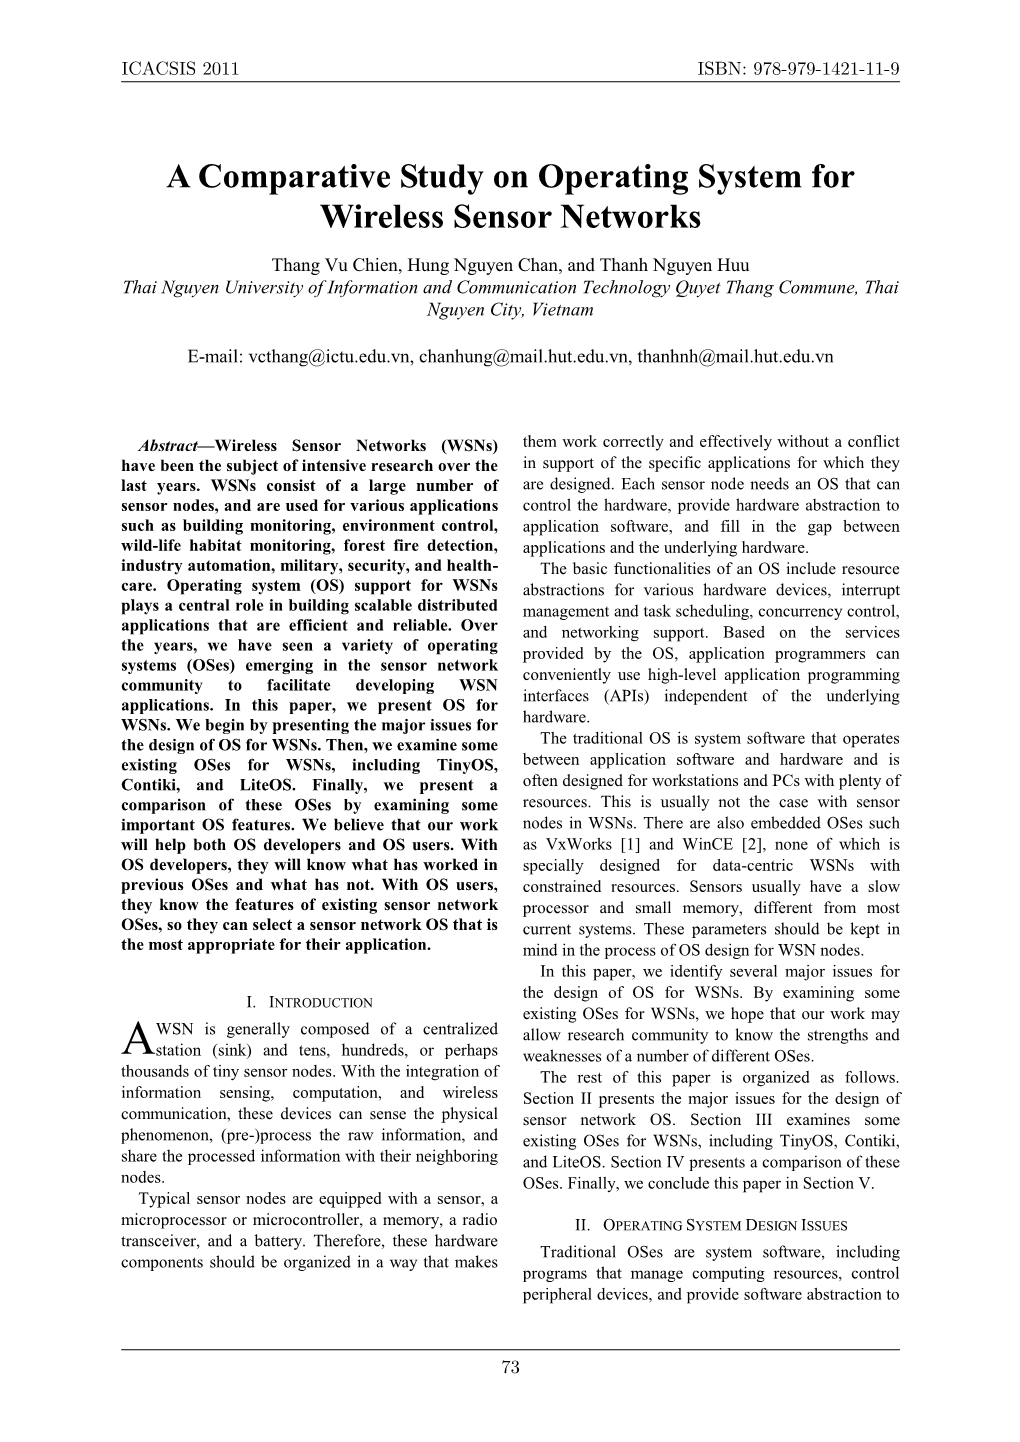 A Comparative Study on Operating System for Wireless Sensor Networks